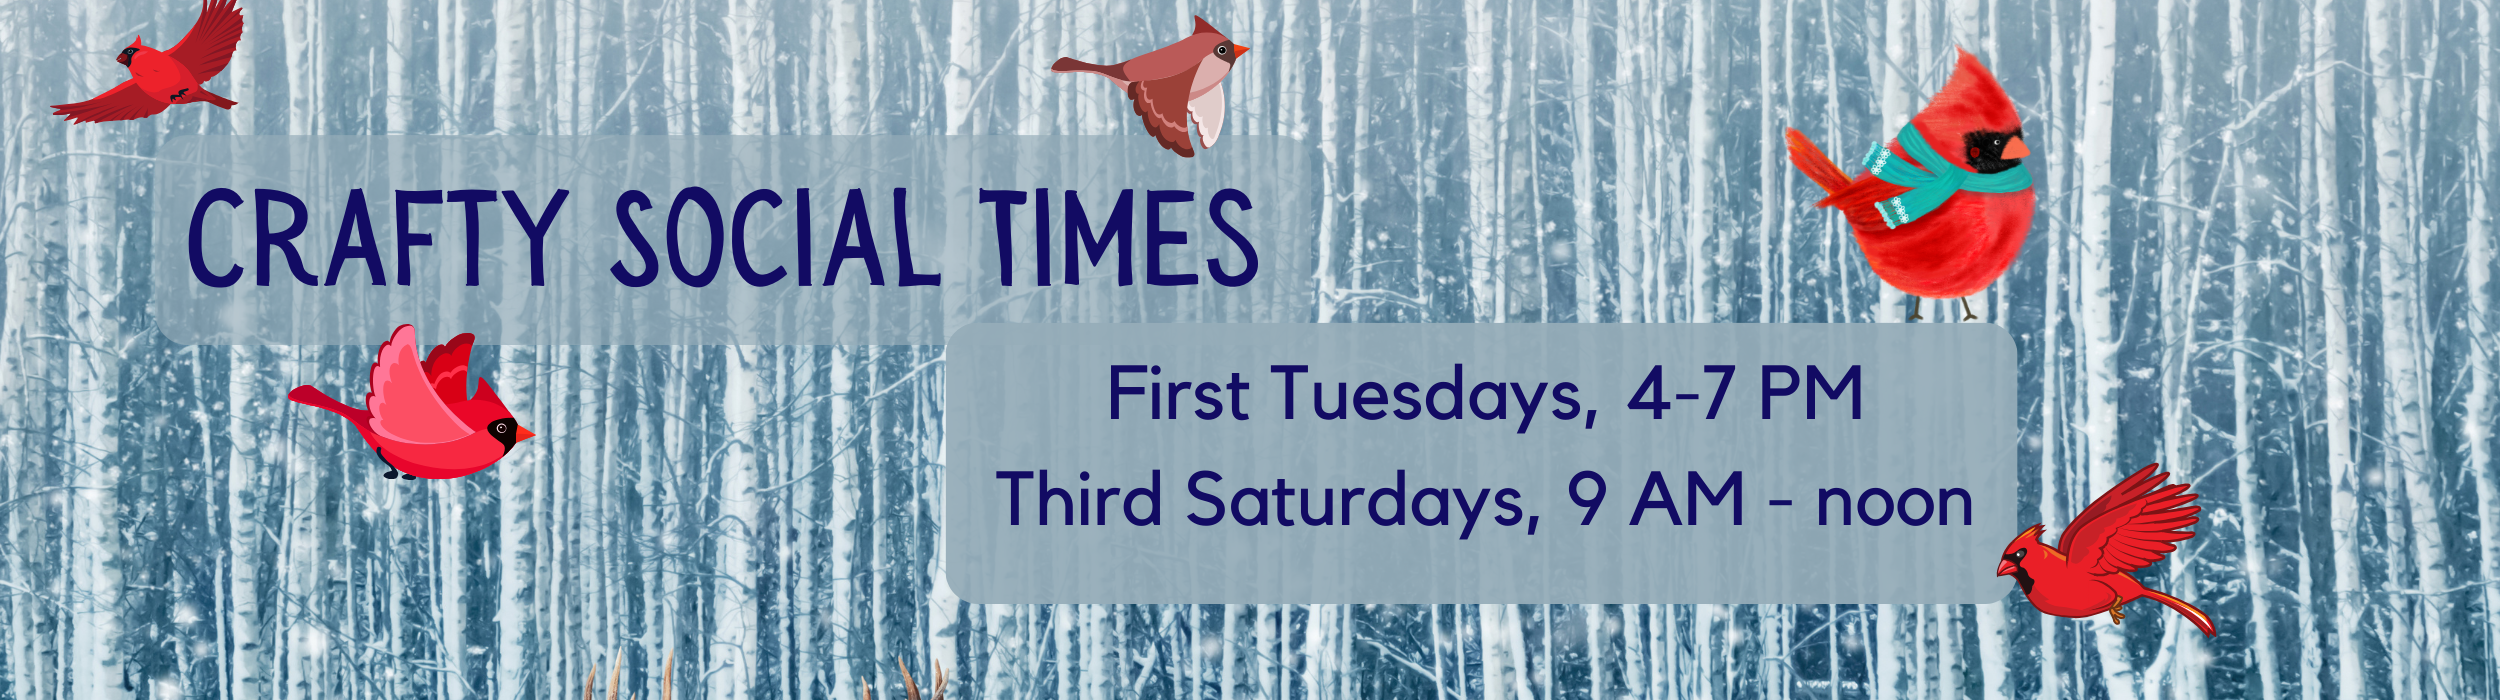 A rectangular image that runs from orange at left to orange on the right, with orange and yellow leaves falling in the background. Text reads Crafty Social Times: First Tuesdays, 4-7 PM, Third Saturdays, 9 AM - noon